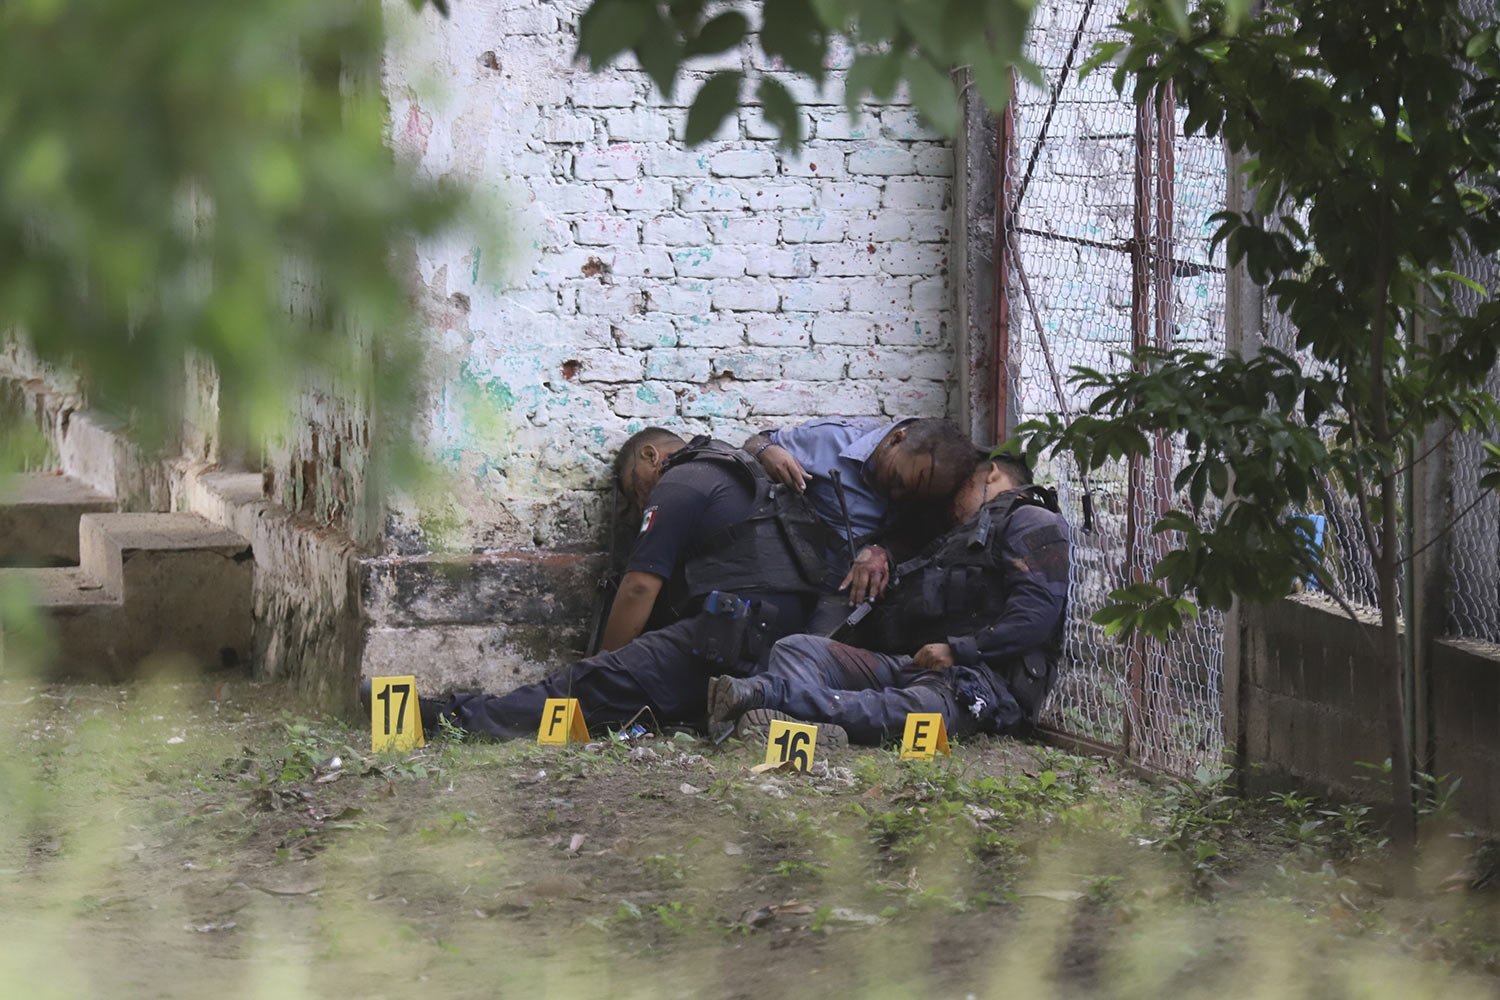  The bodies of slain police officers are slumped against a wall in El Papayo, Guerrero state, Mexico, Oct. 23, 2023, where a local police chief and 12 officers were shot dead in a brutal ambush the day before. (AP Photo/Bernardino Hernandez) 